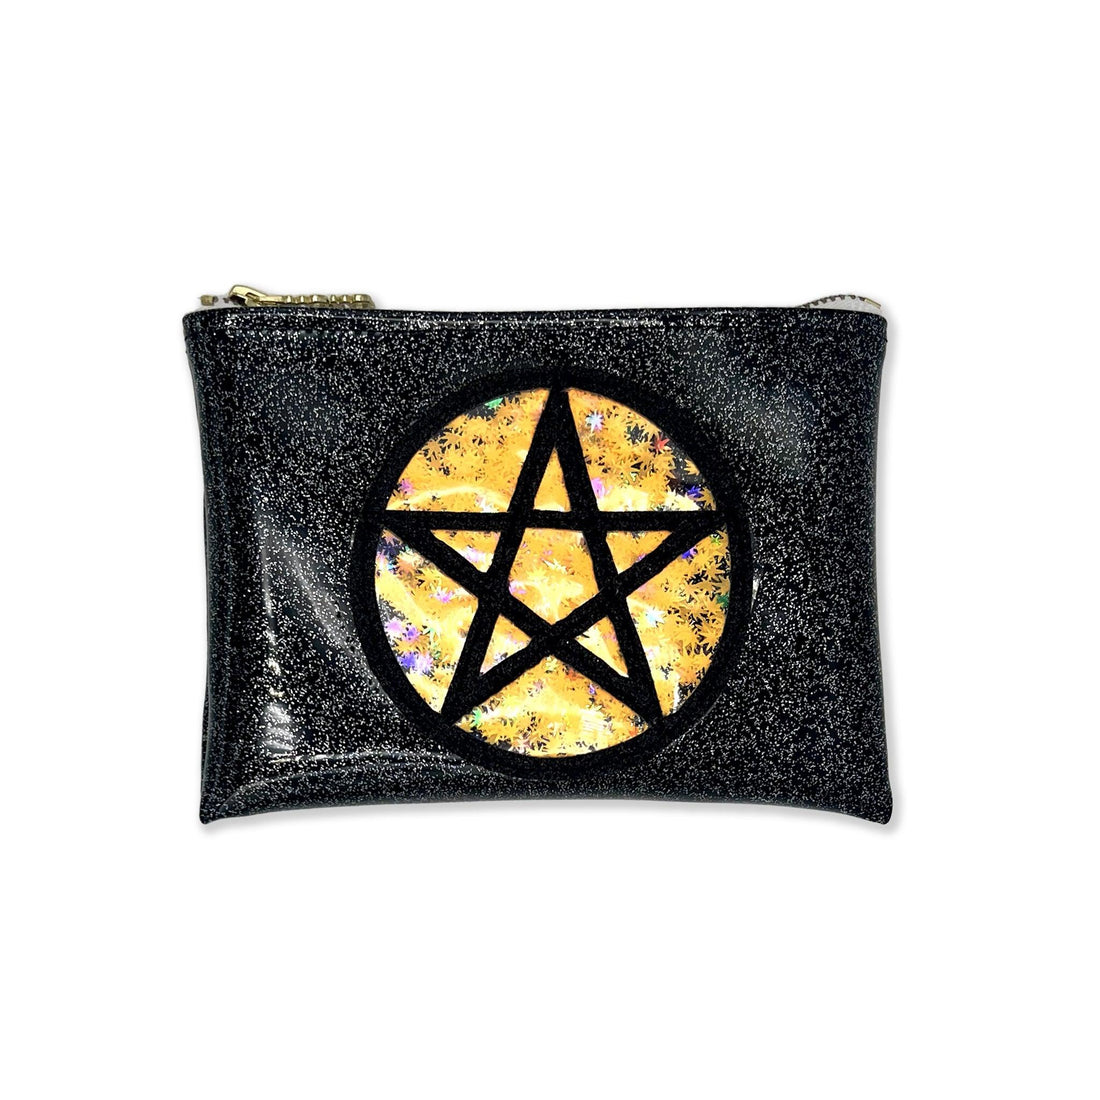 The Witch Way To The Weed Pot Leaf Midi Kush Klutch is a handbag that is 7&quot;x5&quot; in a black glitter vinyl with a pentagram symbol on it. Behind the pentagram is an orange pot leaf confetti encased in vinyl.